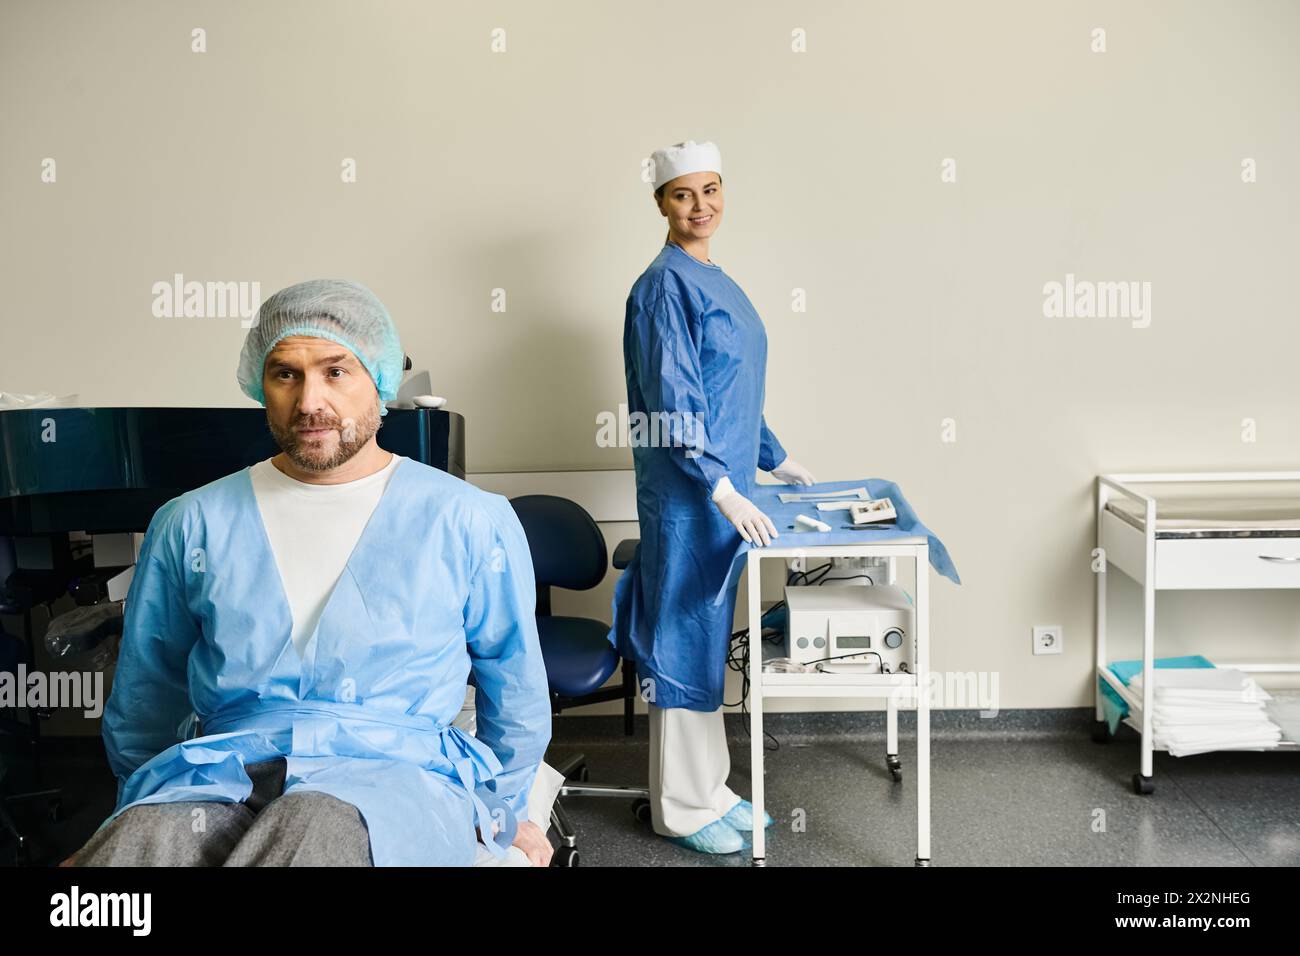 A man in a chair next to a woman in scrubs, discussing laser vision correction. Stock Photo